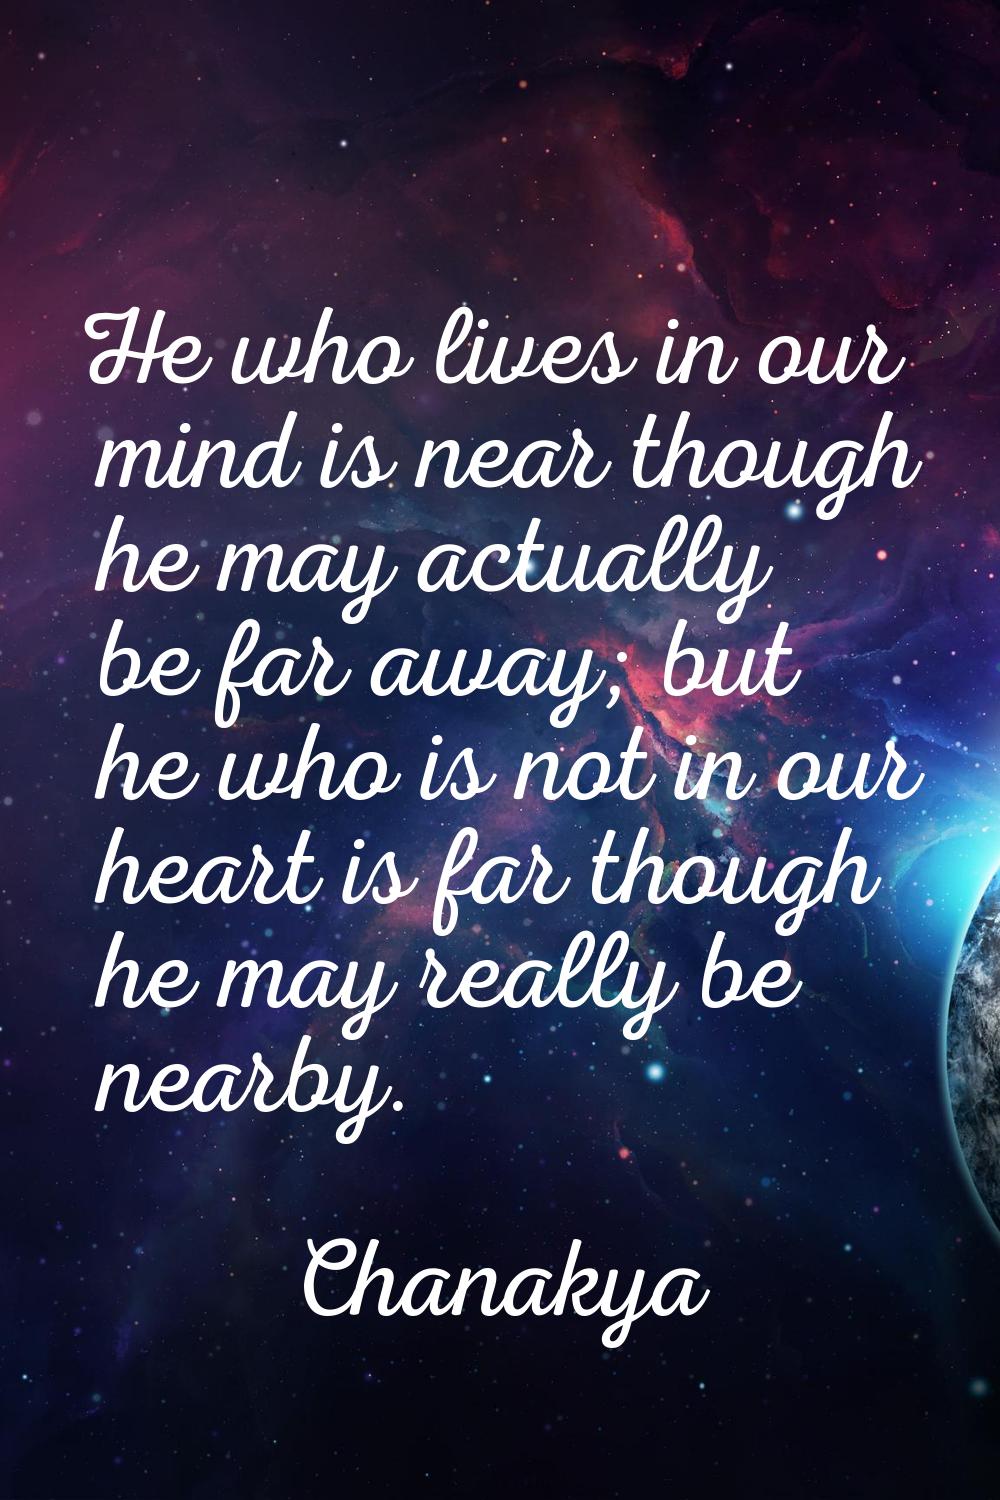 He who lives in our mind is near though he may actually be far away; but he who is not in our heart